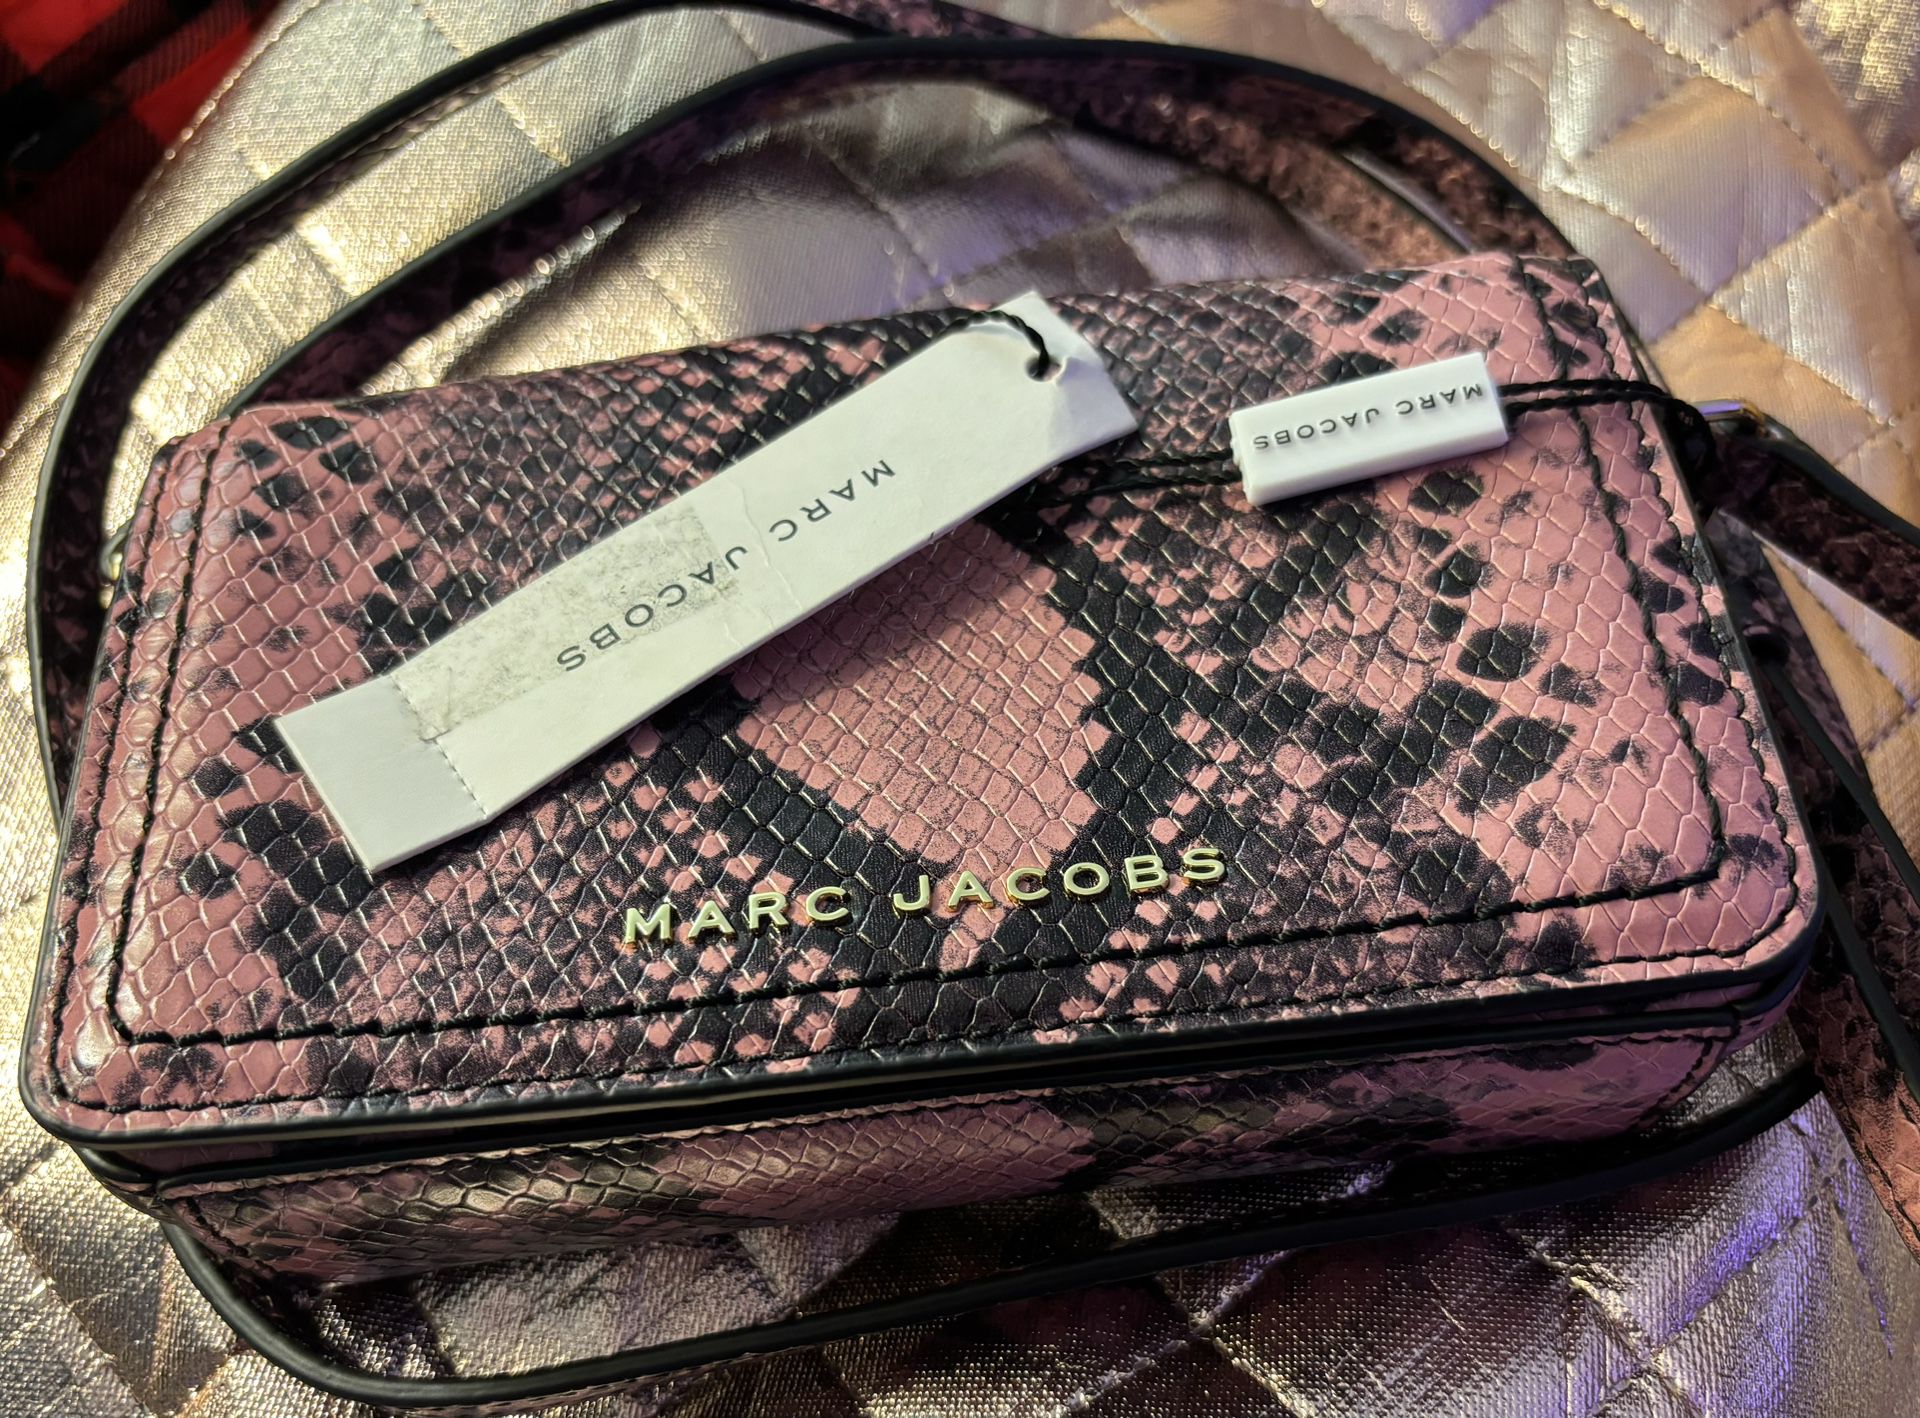 2 Brand New With Tags Designer Purses #Marc Jacobs #Michael Kors